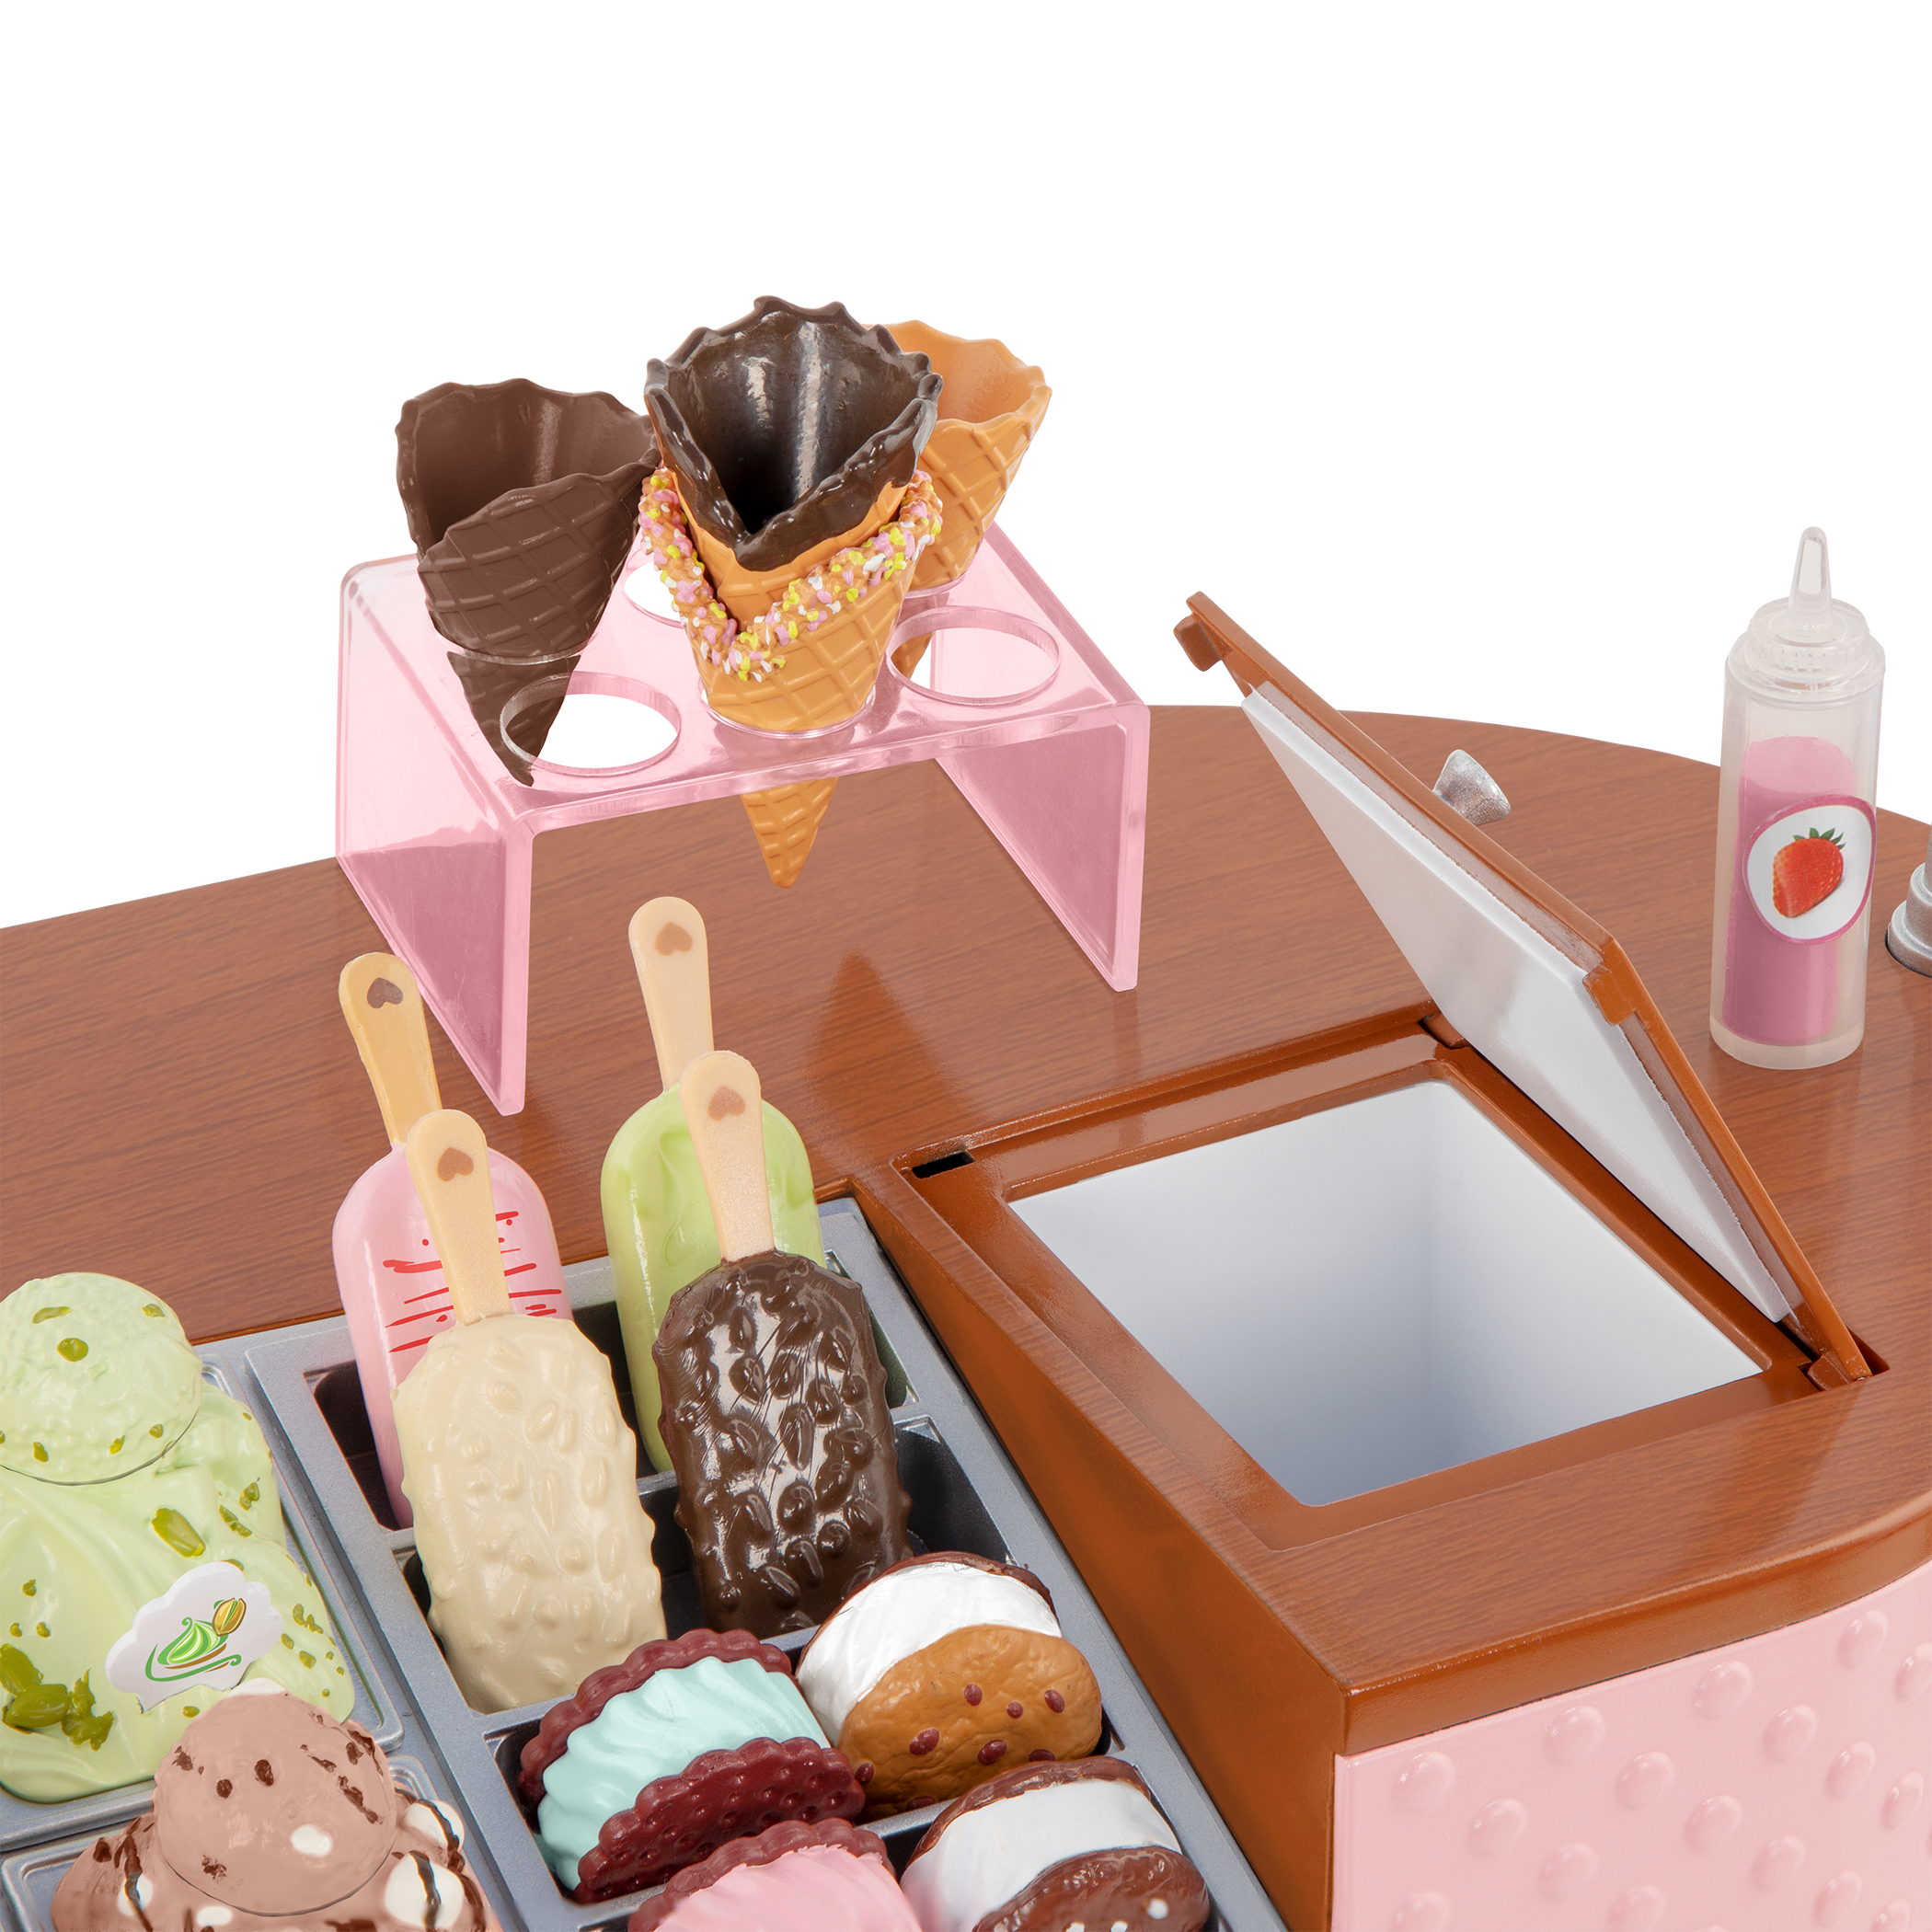 18-inch doll with ice cream cart playset